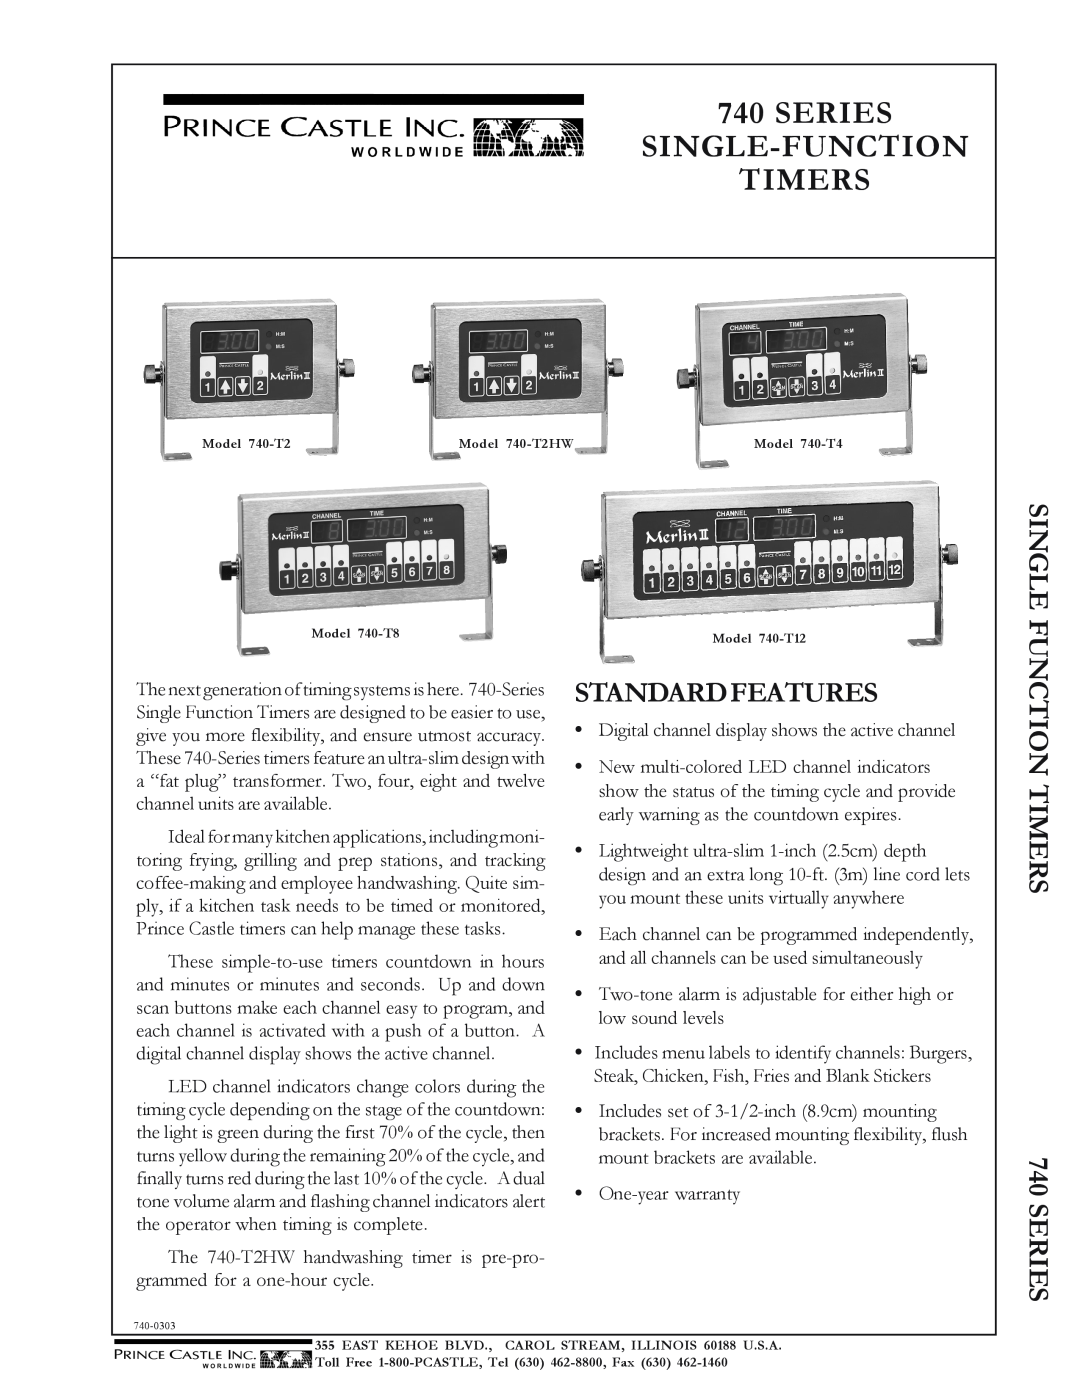 Prince Castle 740-T4, 740-T8, 740-T2 warranty Series Single-Function Timers, Standardfeatures, FUNCTION TIMERS 740 SERIES 